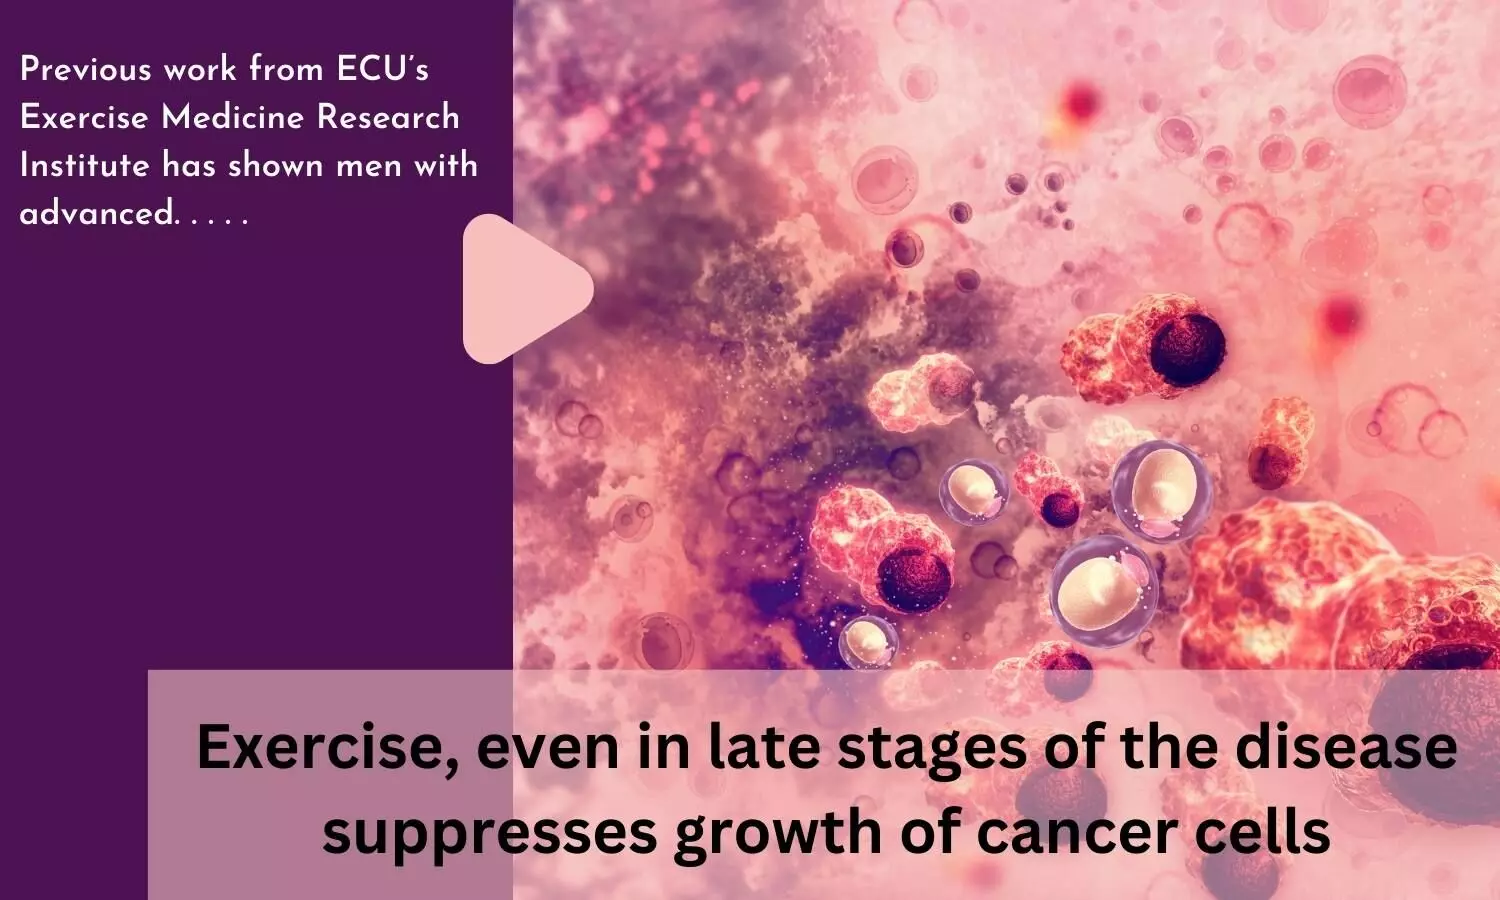 Exercise, even in late stages of the disease suppresses growth of cancer cells